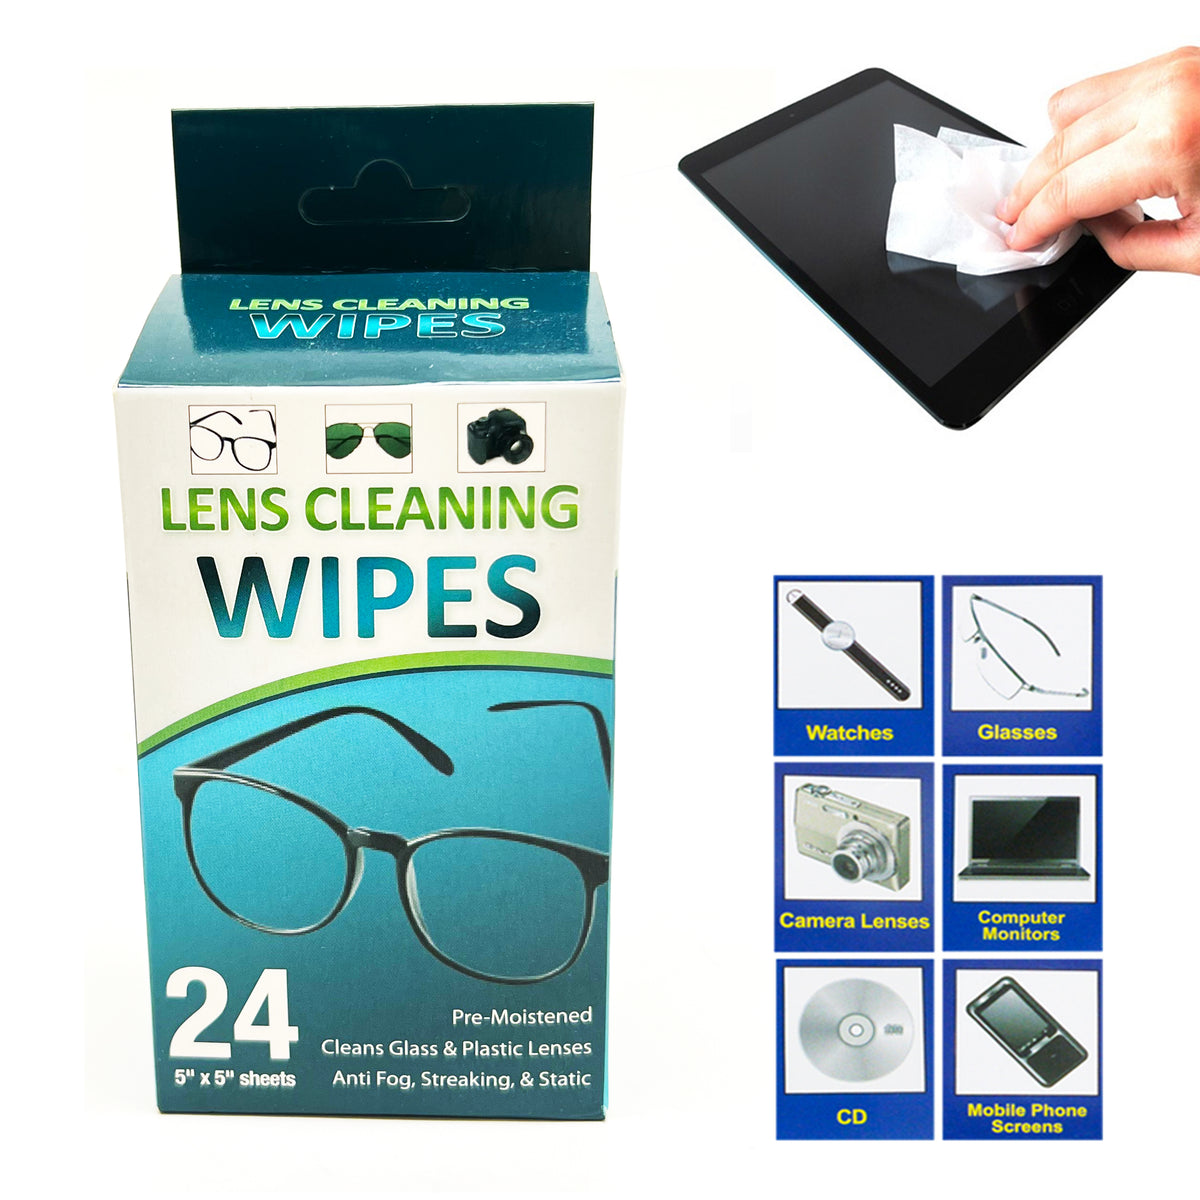 120 Lens Cleaning Wipes Pre-Moistened Cloths Eye Glasses Computer Camera Optical